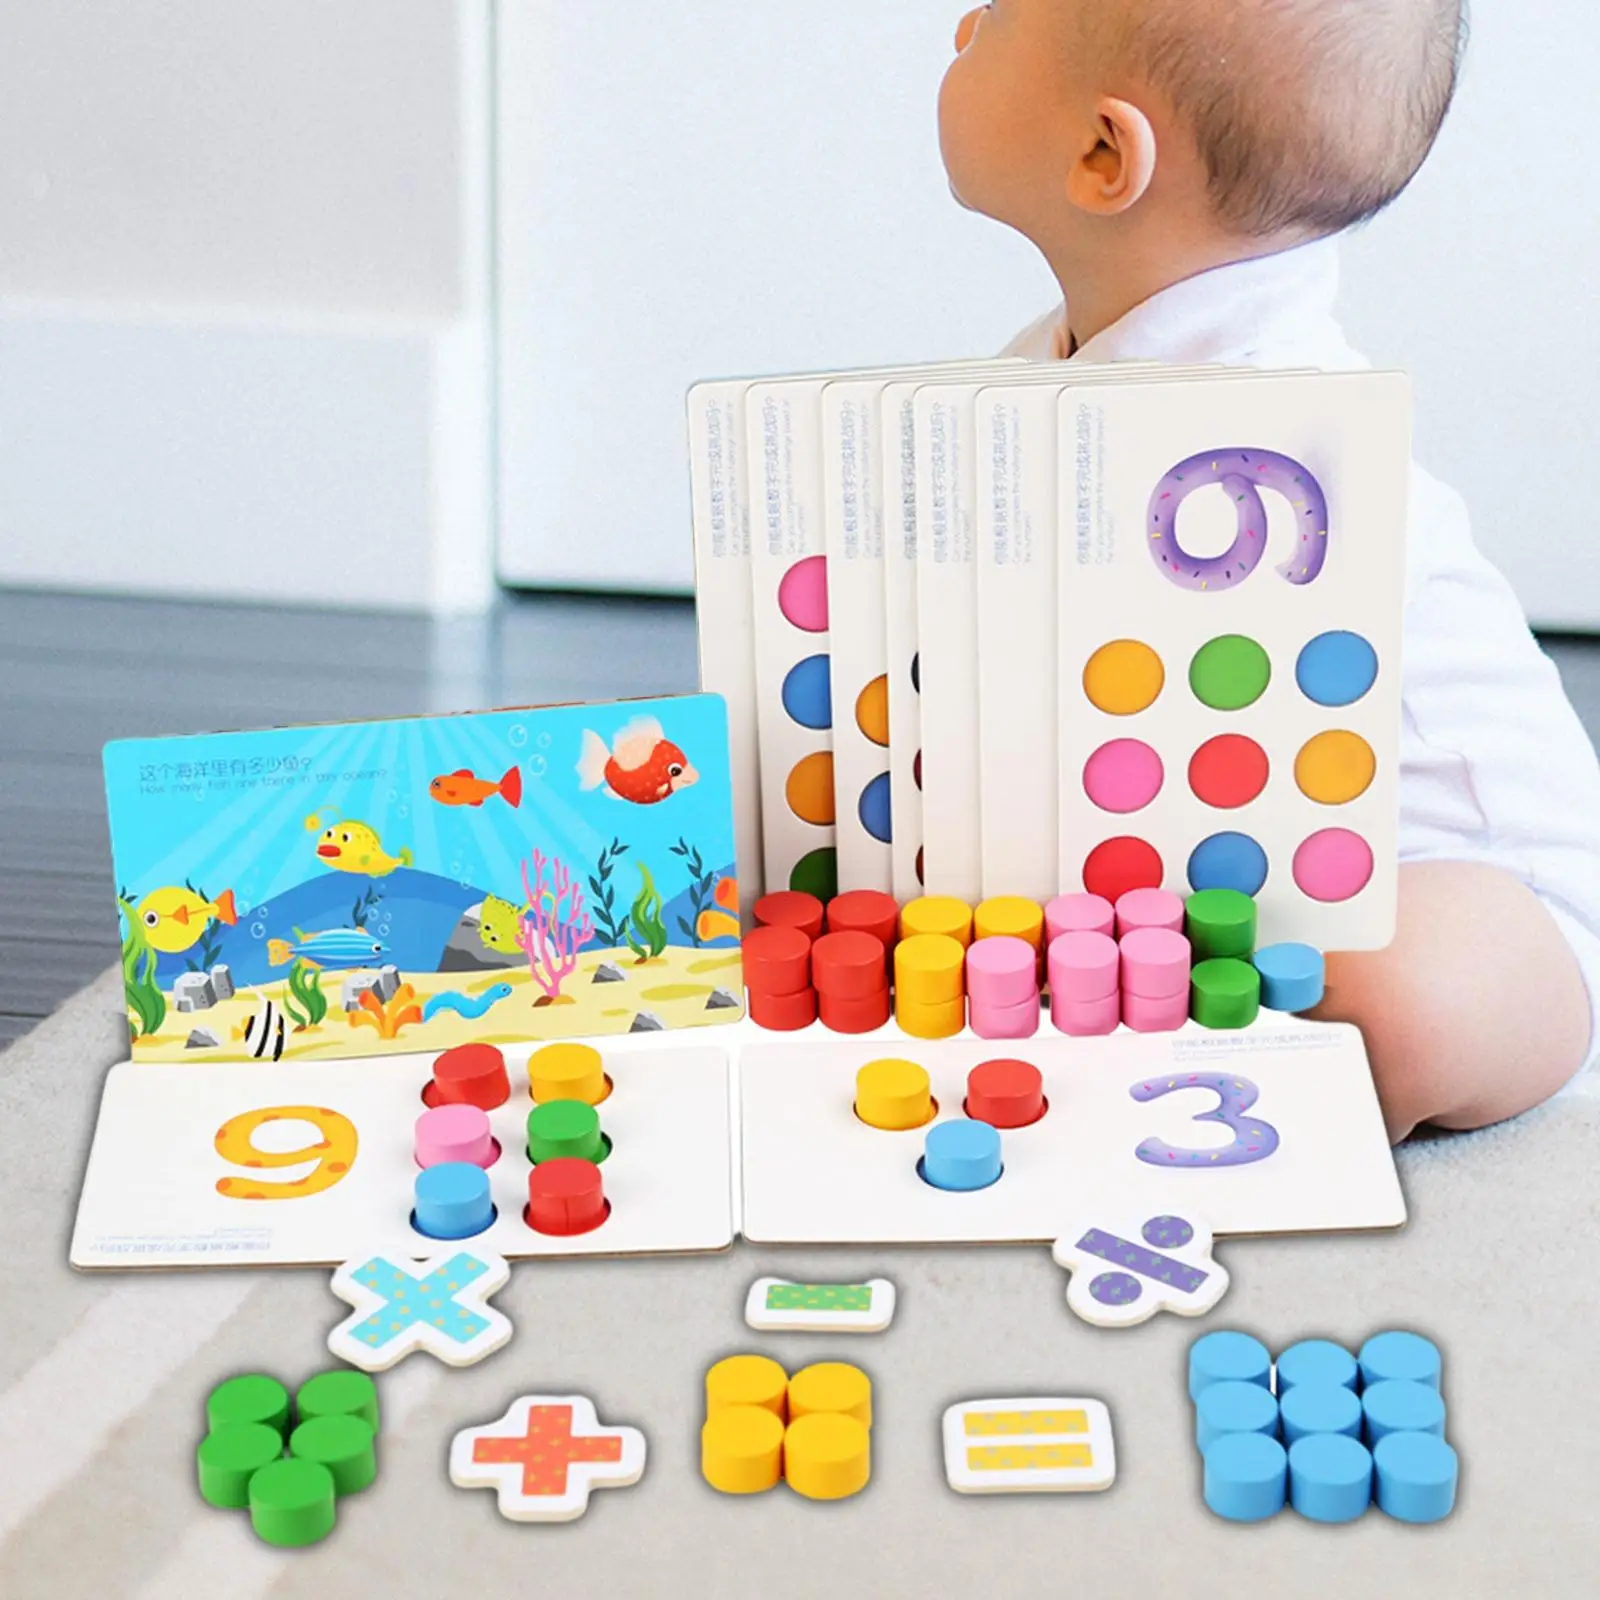 Cards Matching Toys Number Quantity Learning Recognition for Preschool